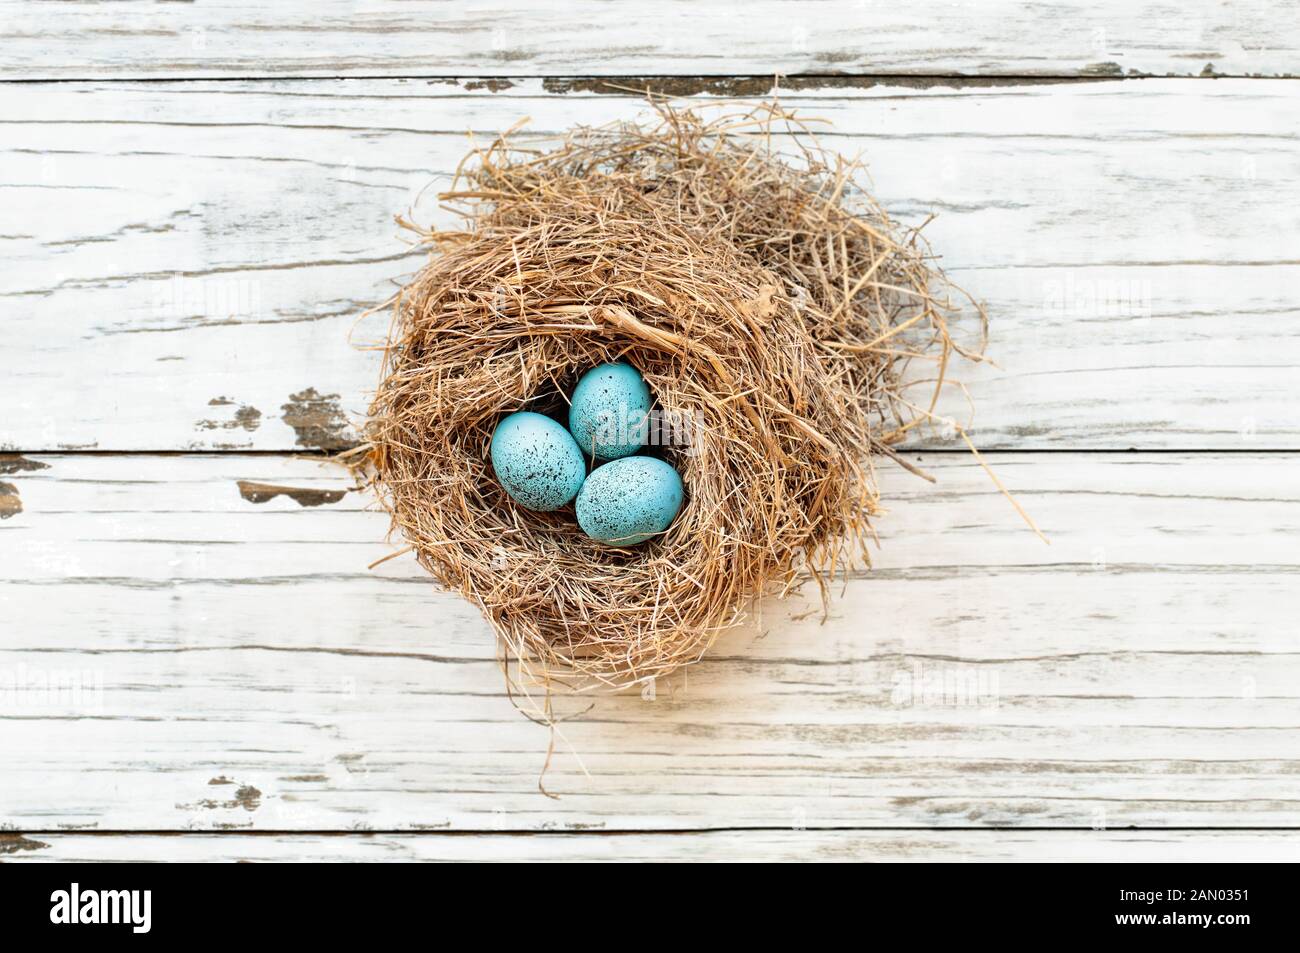 Real birds nest over a rustic wooden white table with small speckled Robin blue eggs. Selective focus on eggs with slight blurred background. Stock Photo